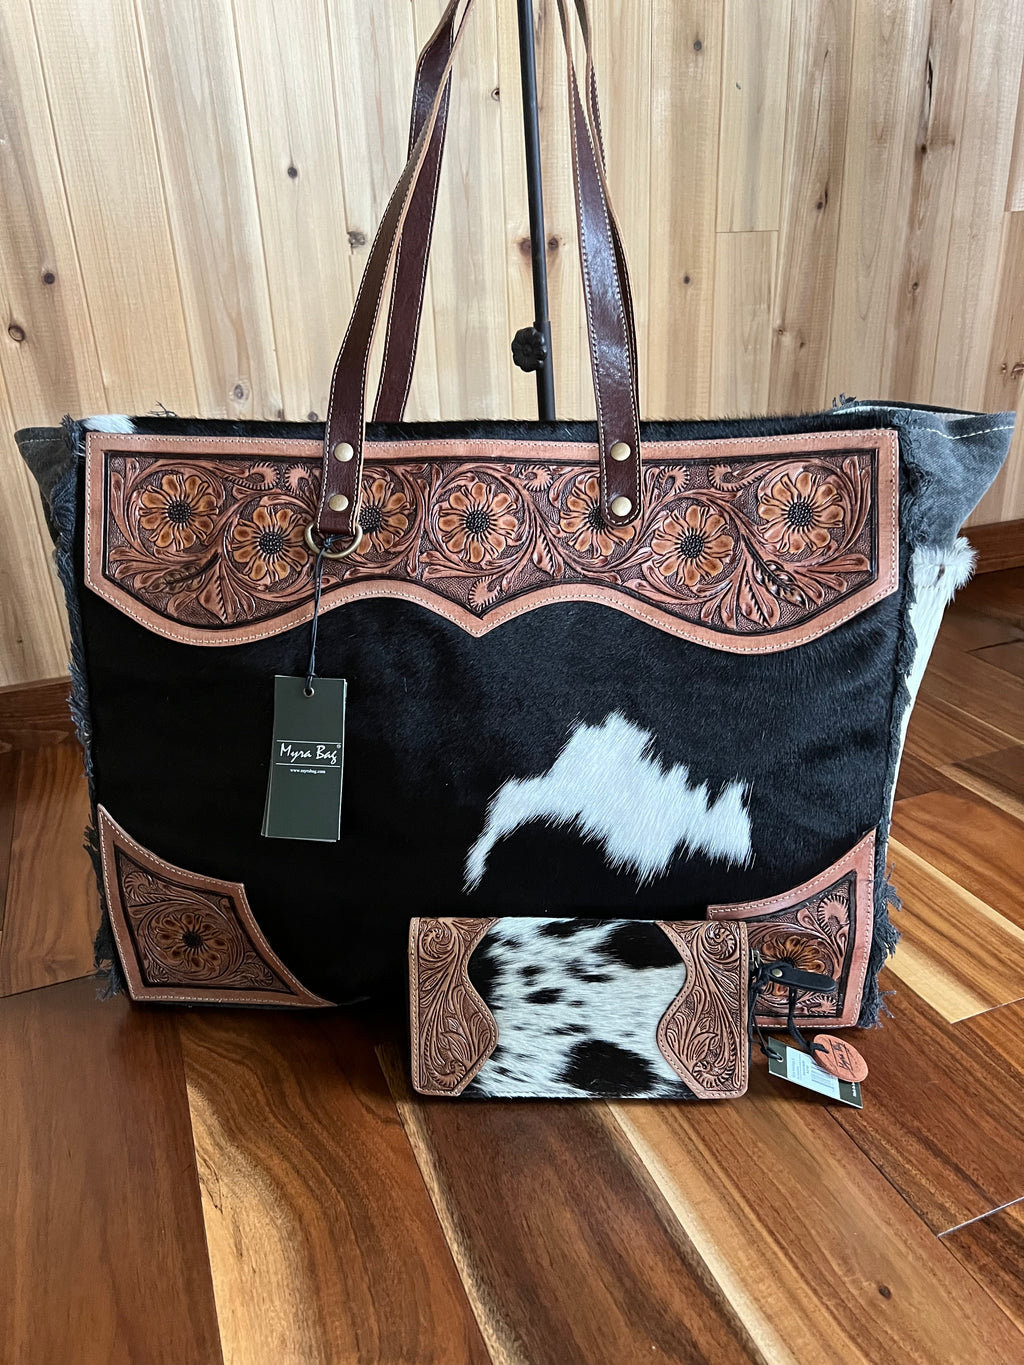 Myra Bag Cowhide Floral  Tooled Leather Canvas Carry-on Travel Weekender Tote